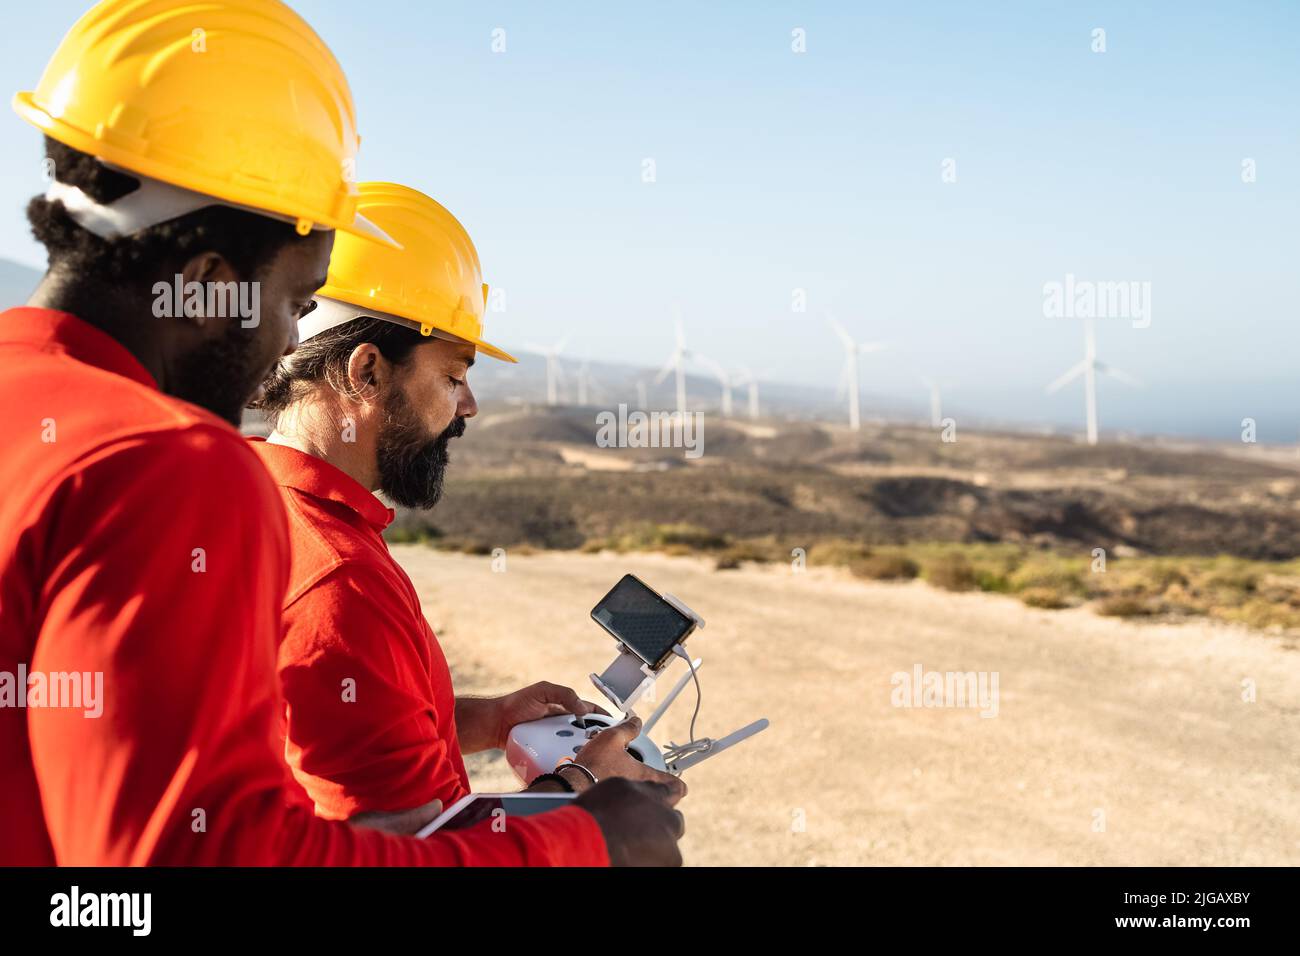 Drone engineers working on wind turbine farm - Alternative energy and aerial engineering concept Stock Photo